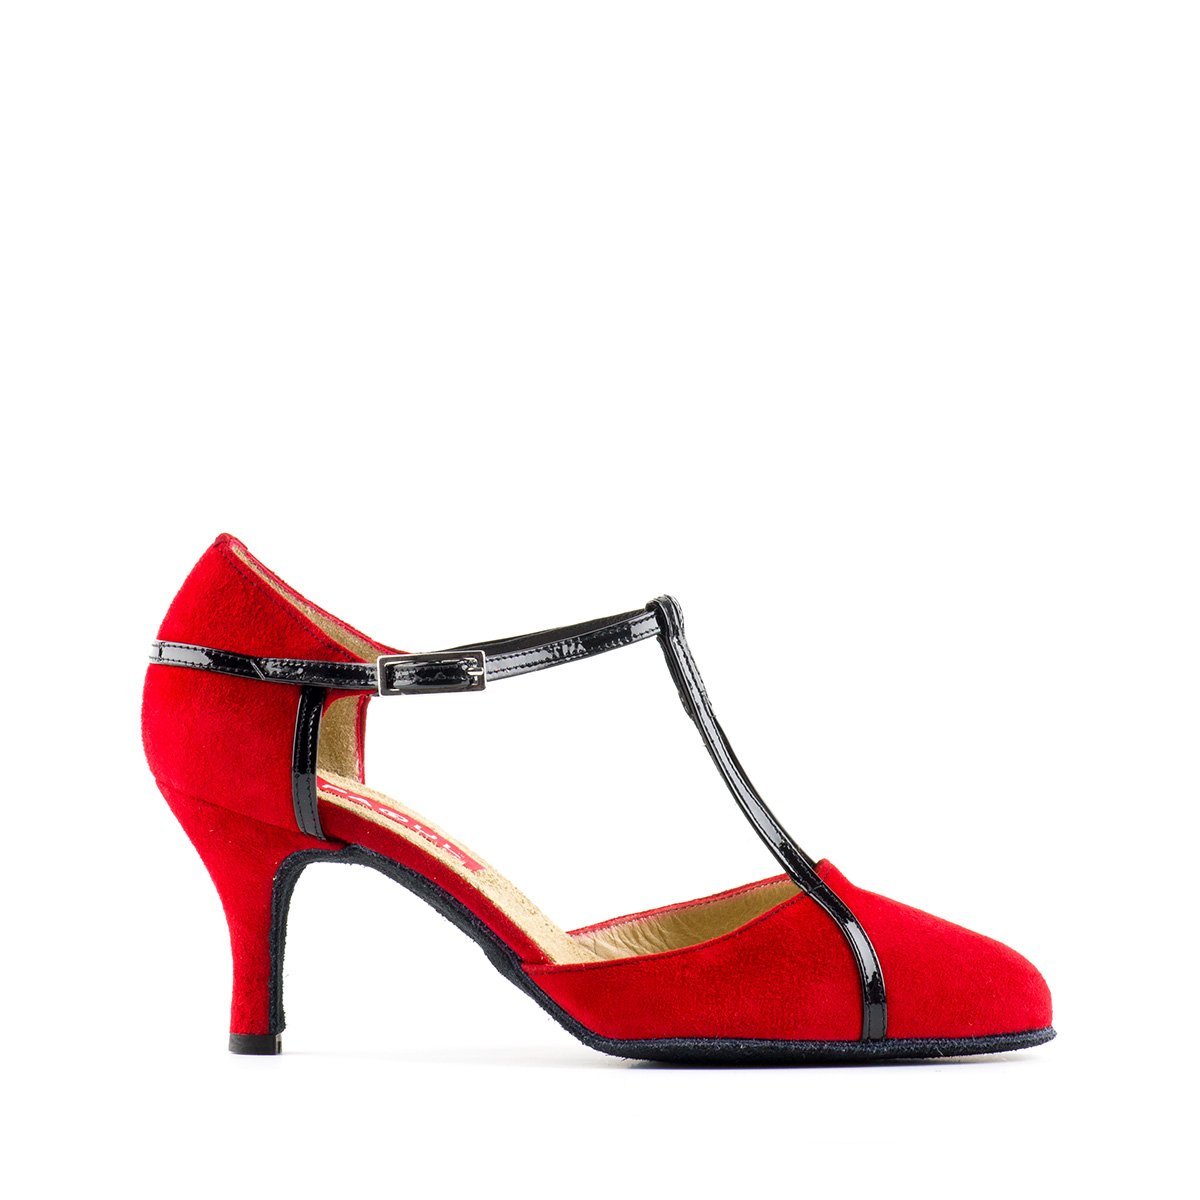 Ladies Red Suede Argentine Tango Dance Shoe with Black Patent Straps